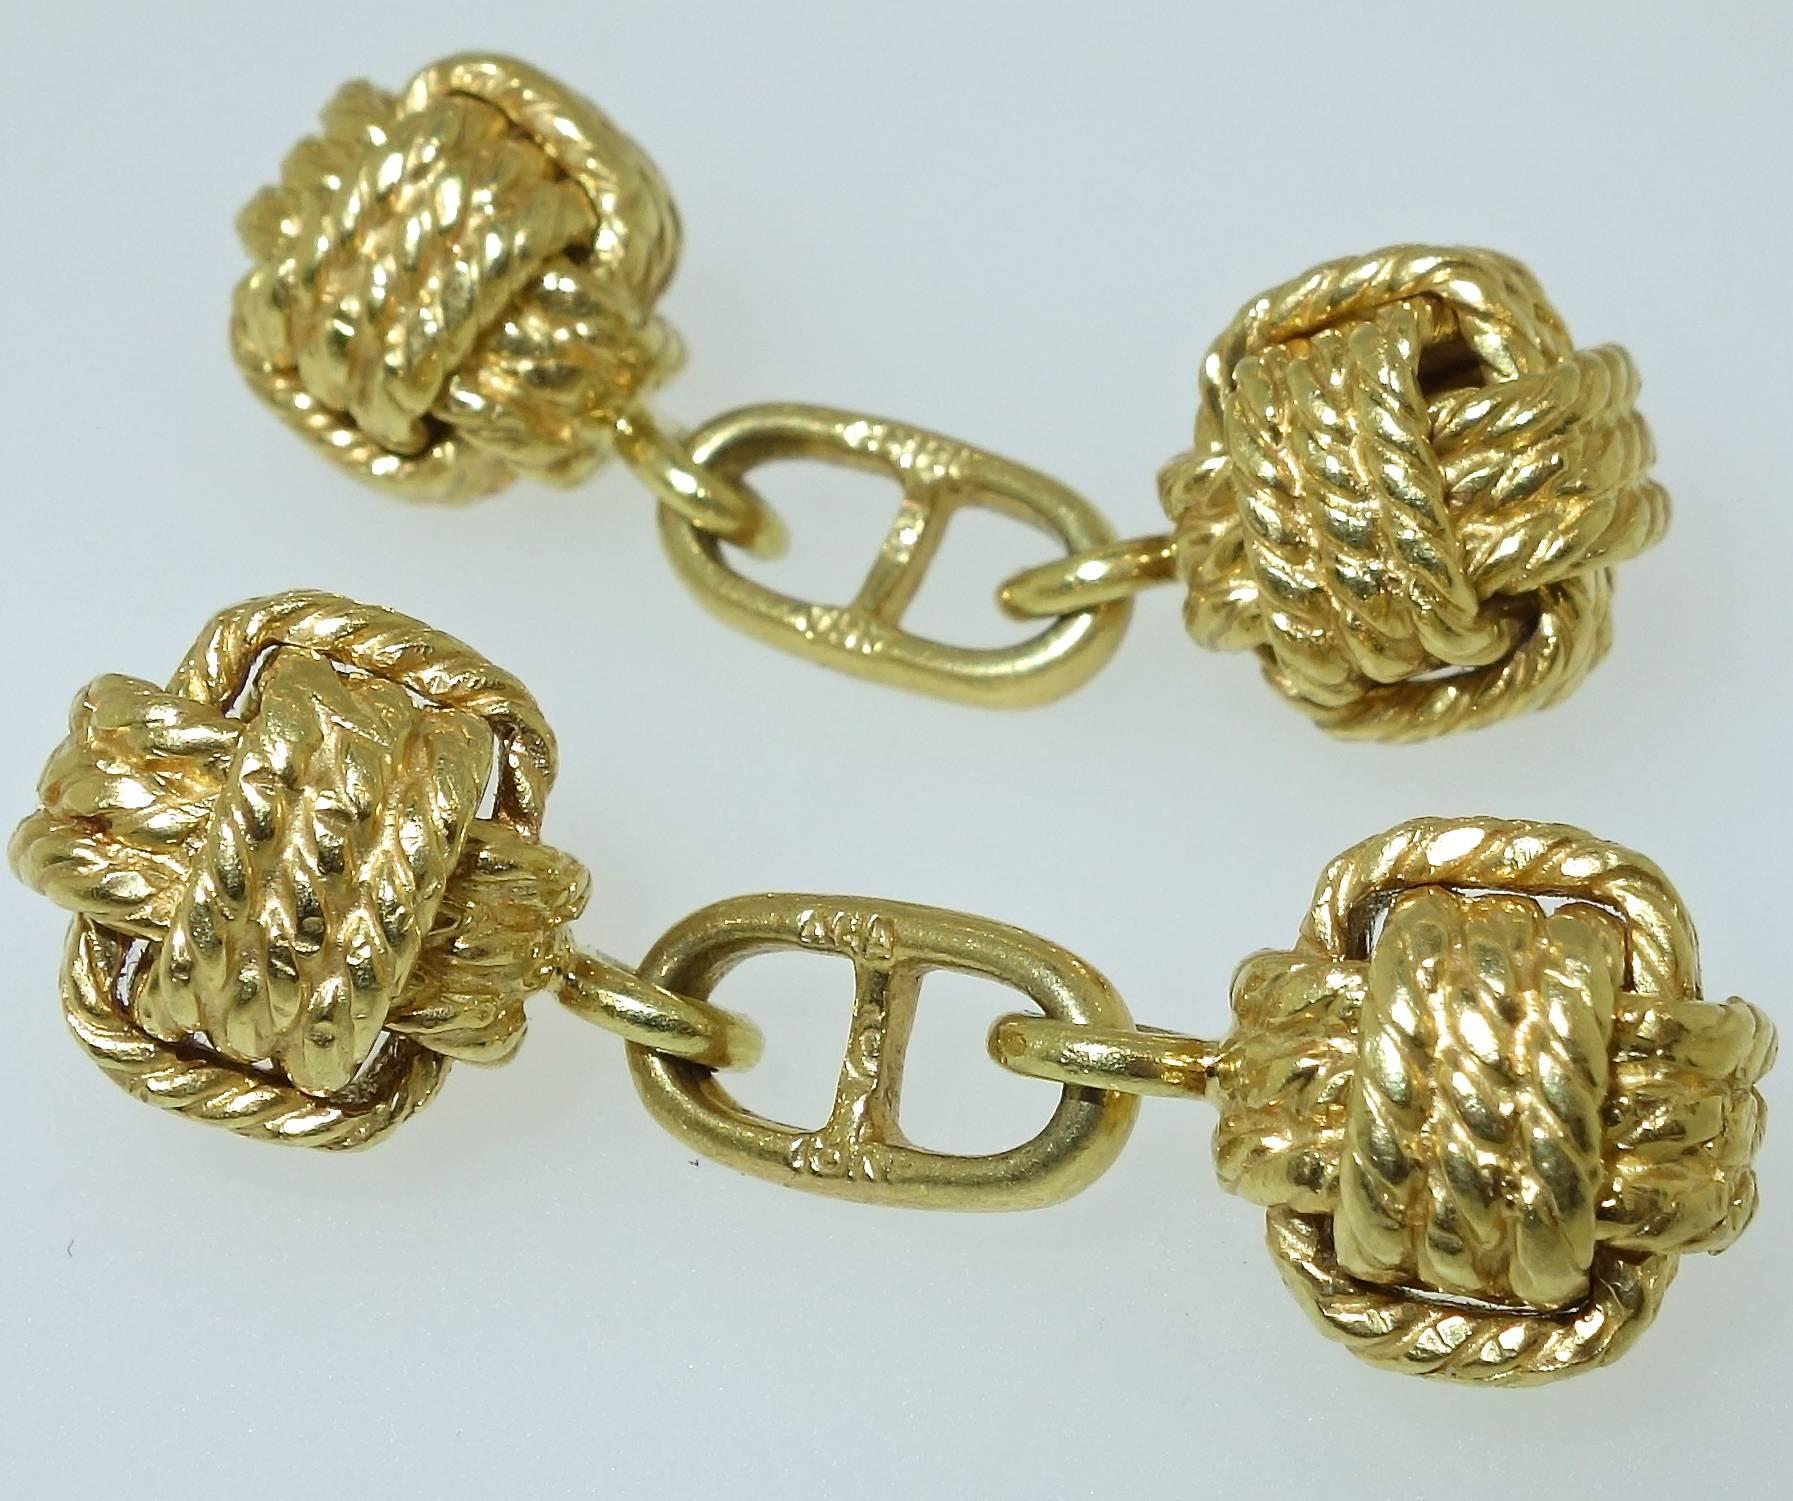 Heavy 18K yellow gold, 16 dwt, back to back cufflinks, 10.5 mm in diameter, circa 1960's, these cufflinks are of an unusual nautical theme. A boating/sailing enthusiast has told us that the knots are called “monkeys fists”, and were tied around a